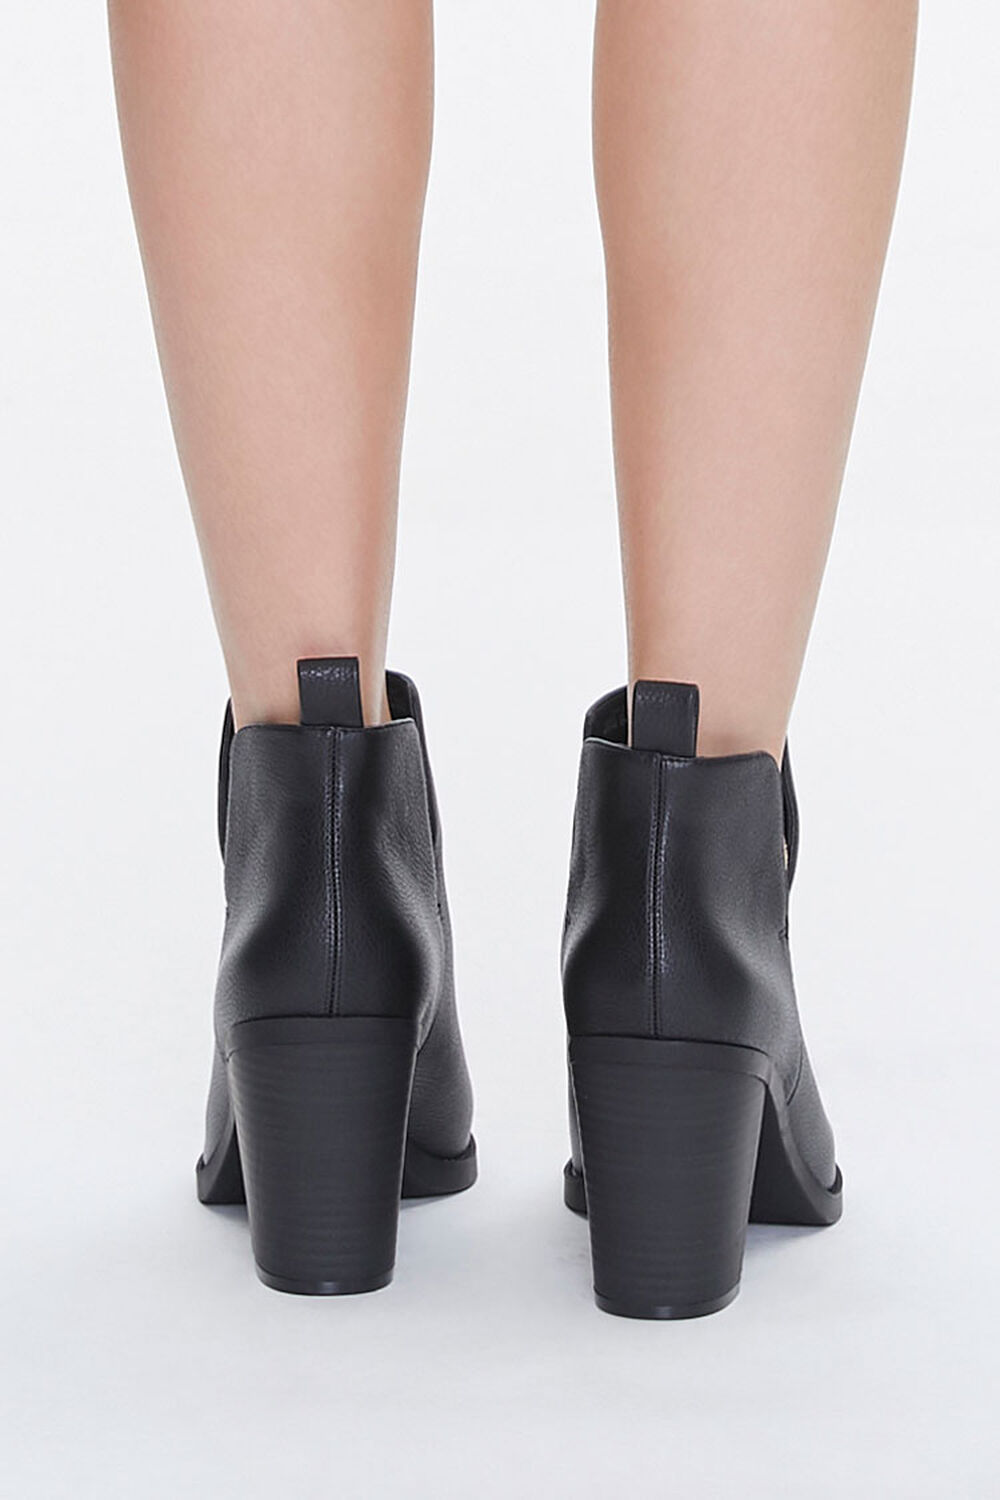 BLACK Faux Leather Pointed Booties, image 3